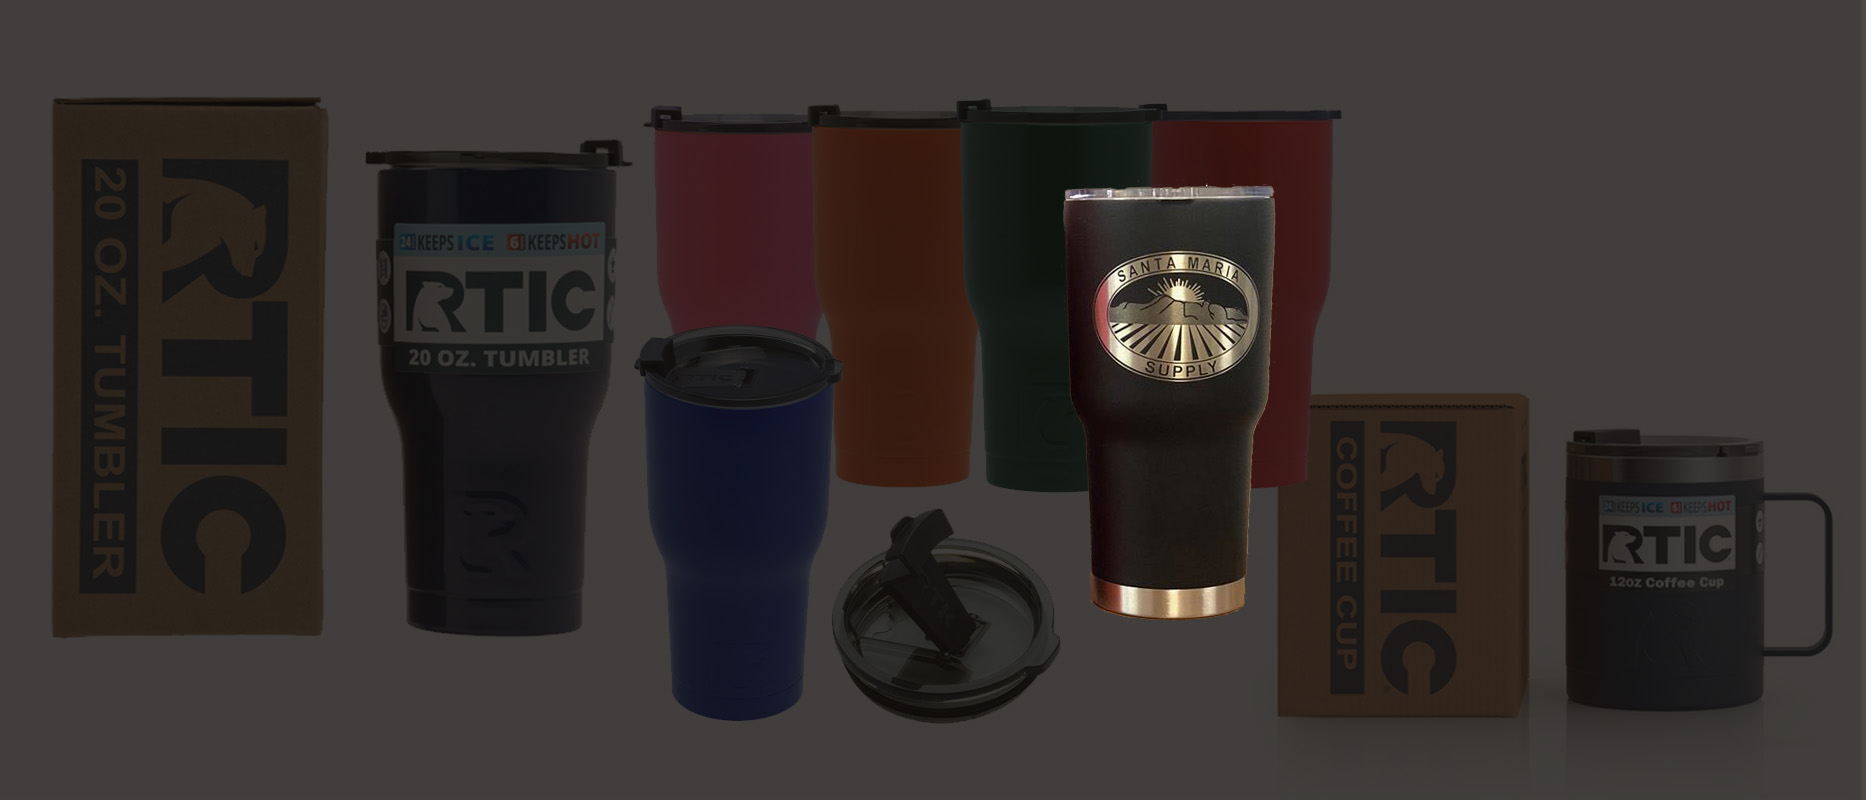 https://www.centralcoastpackaging.com/wp-content/uploads/2020/08/RTIC-Coffee-Tumbler-BANNER3.jpg